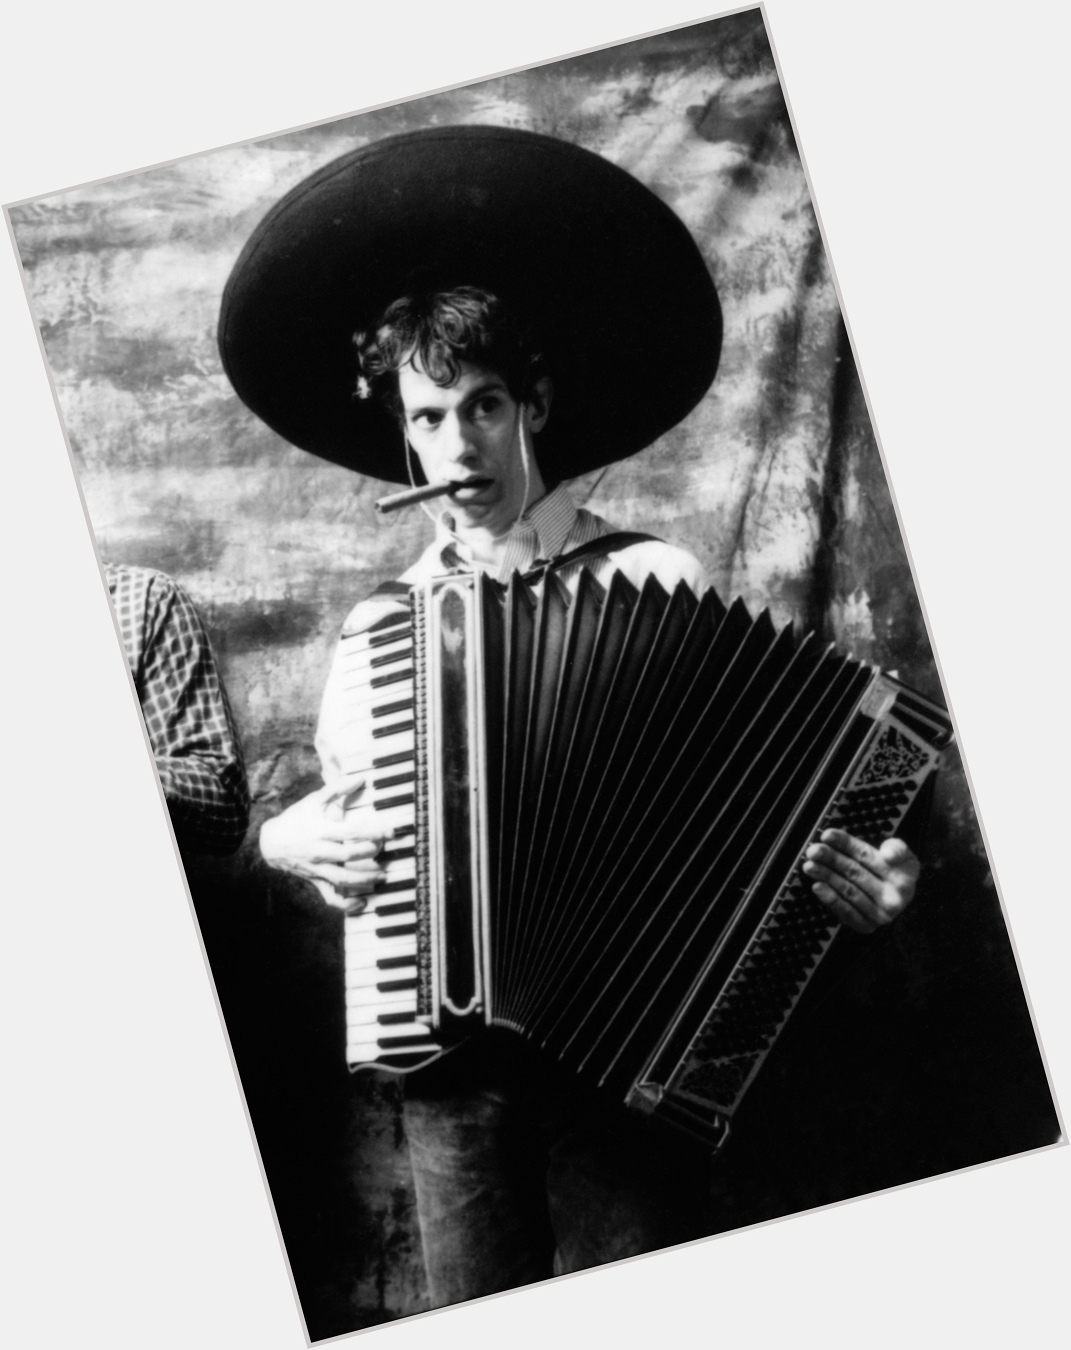 Happy 63rd birthday to john linnell! thank you for all of the great music you\ve given us so far through TMBG! 